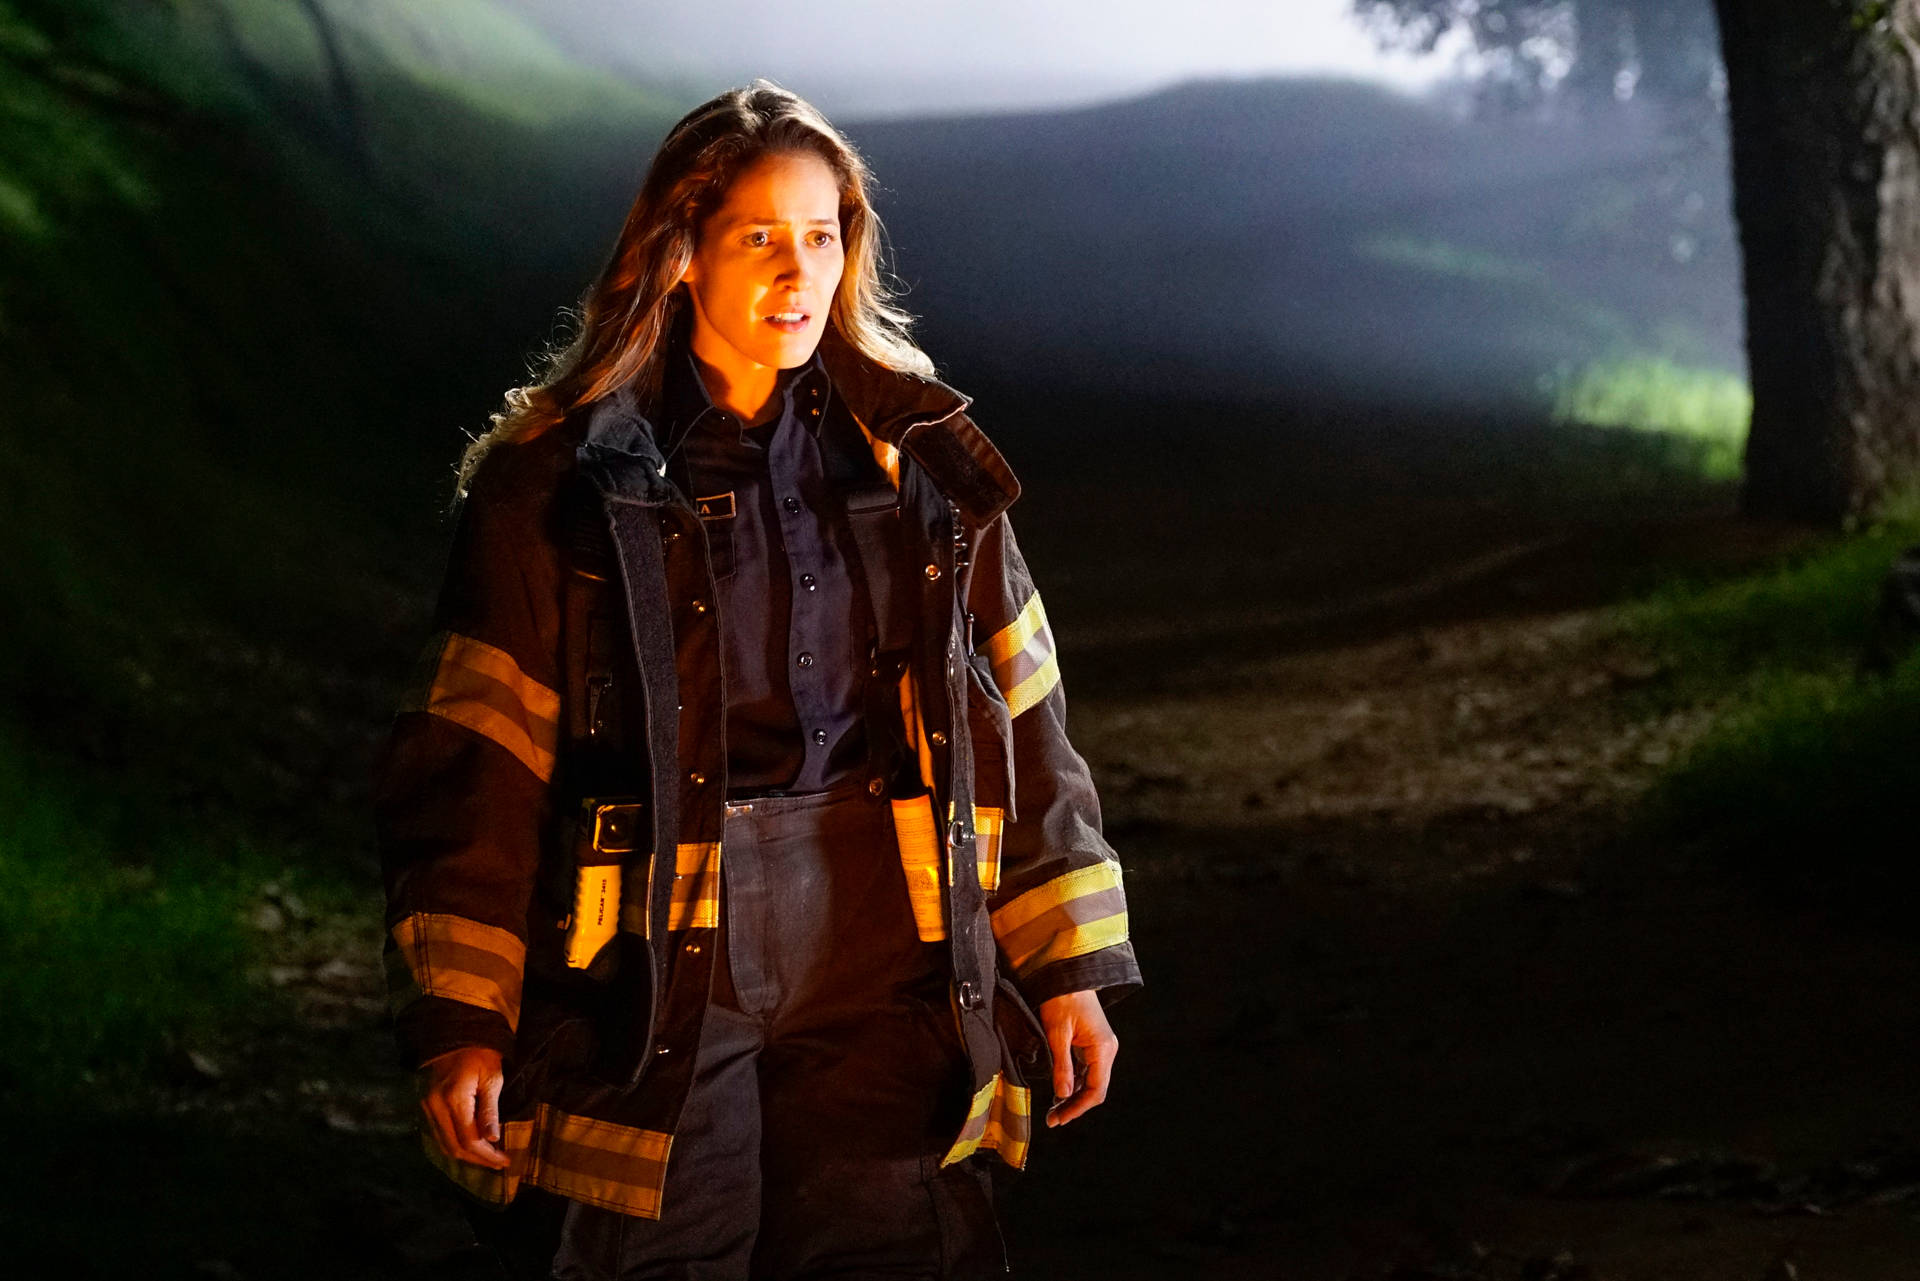 Caption: Courageous Firefighter From Station 19 Background